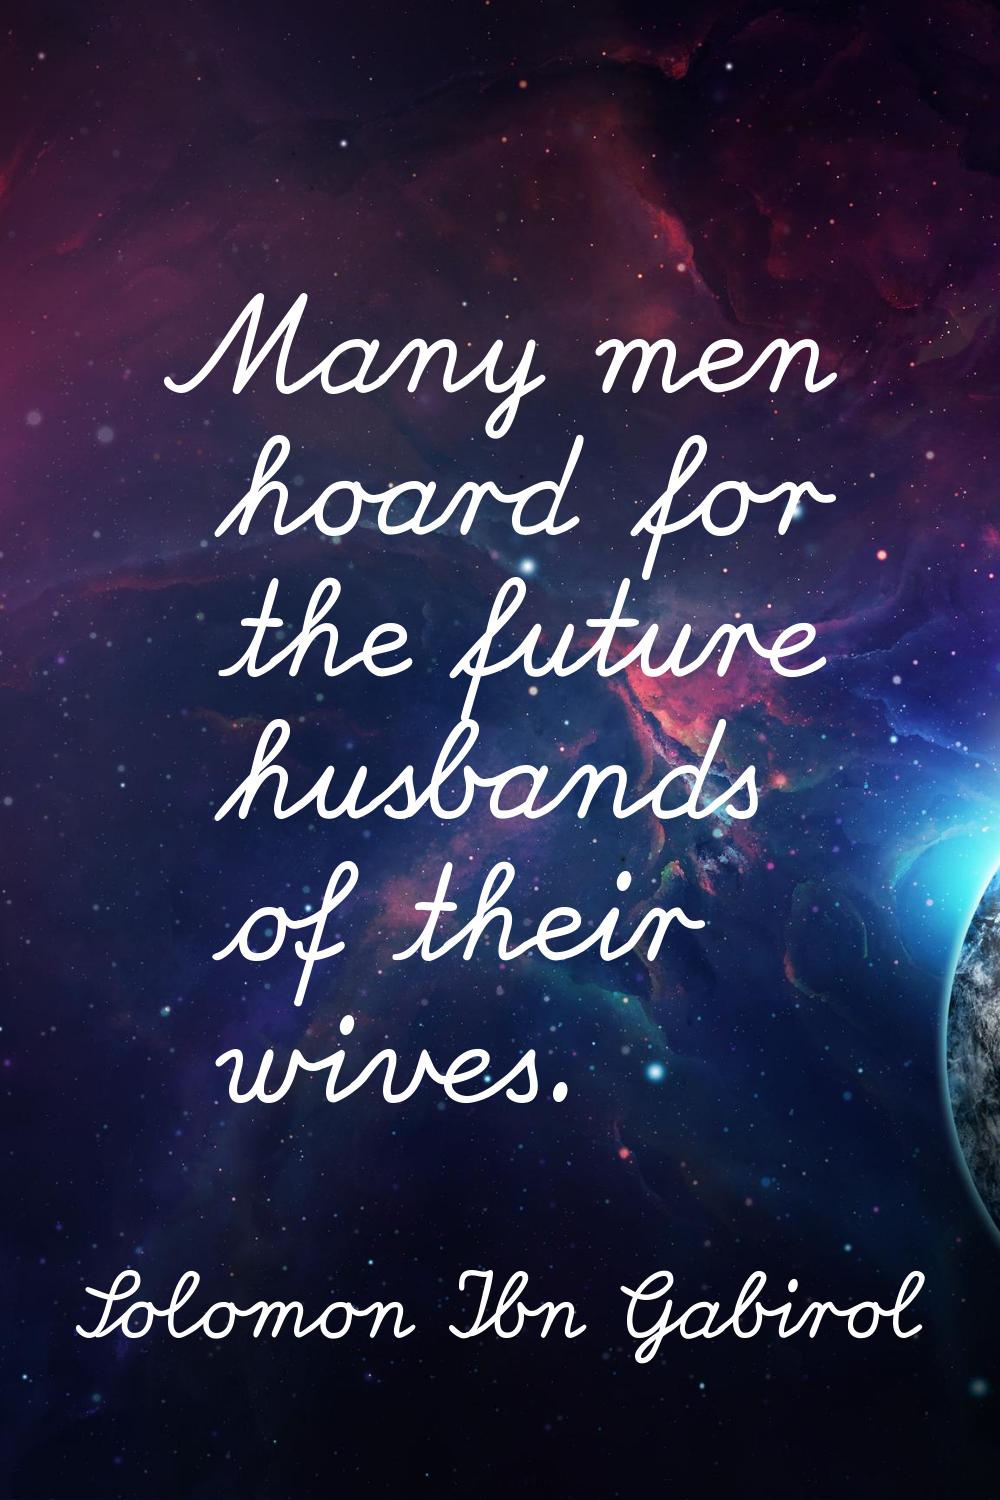 Many men hoard for the future husbands of their wives.